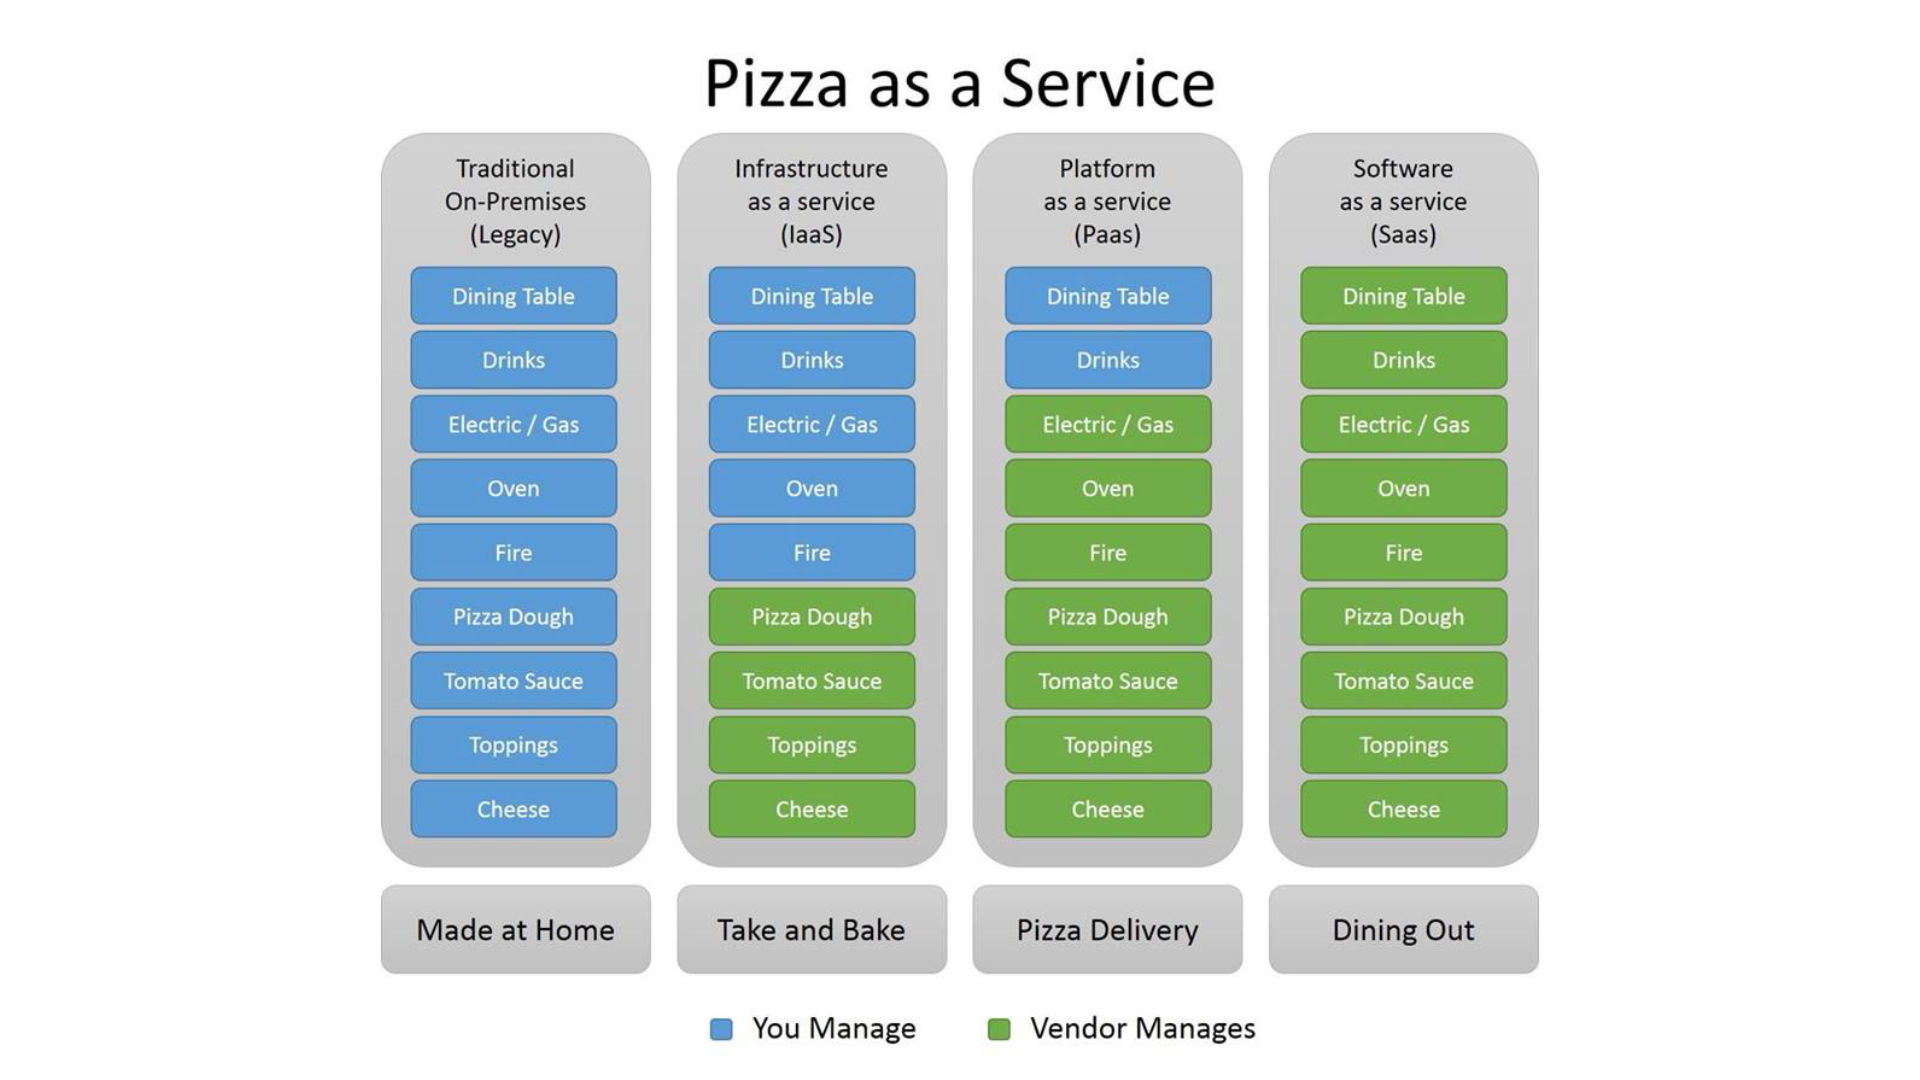 Pizza as a Service 2